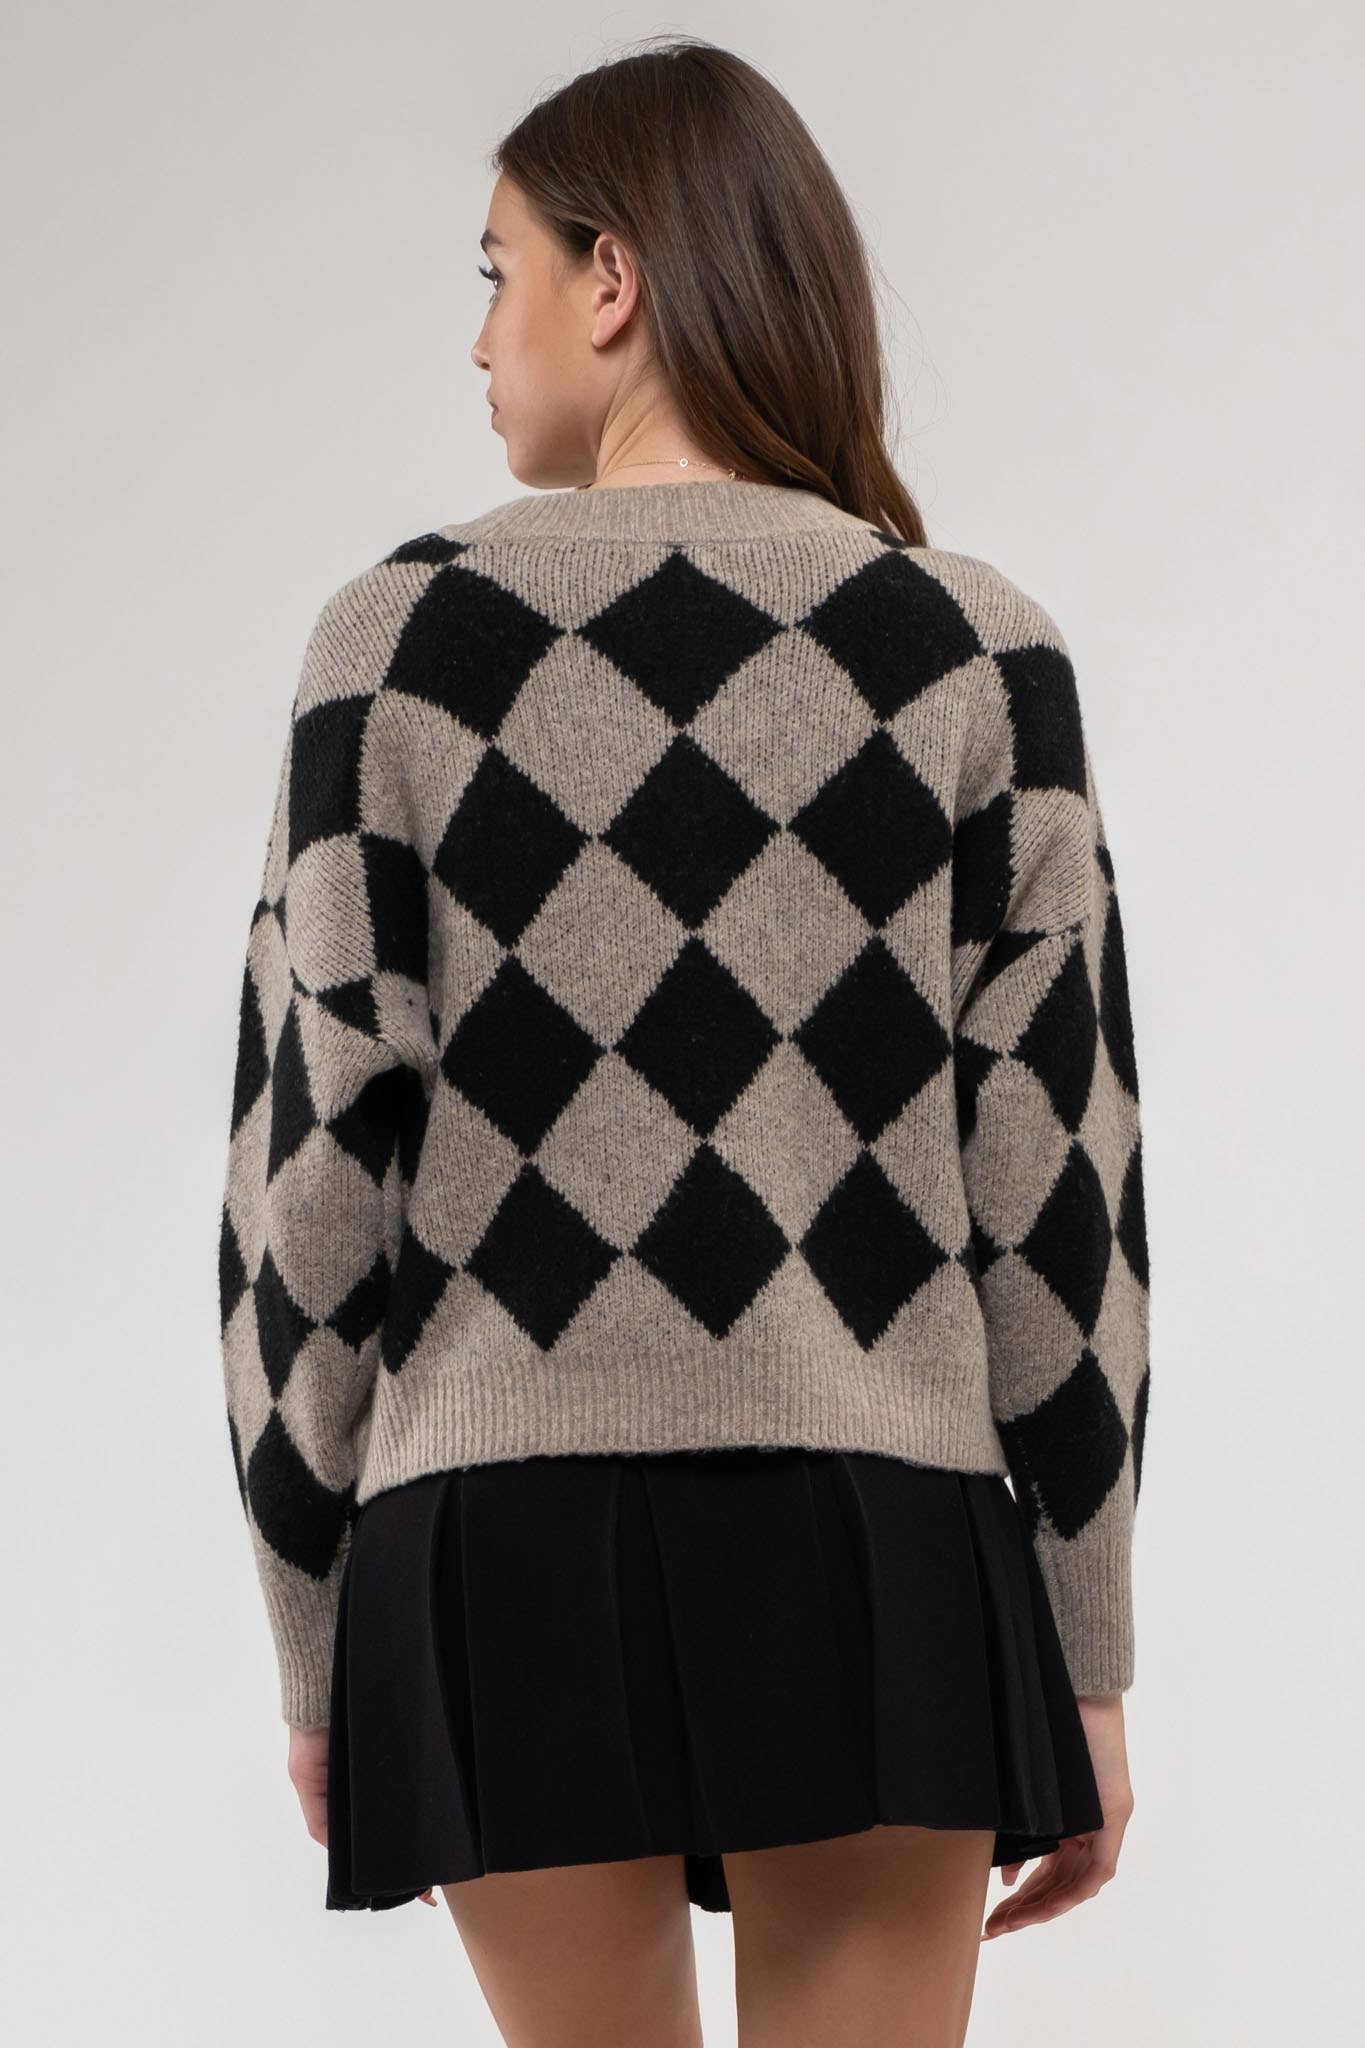 The Quinn Crew Knit Sweater